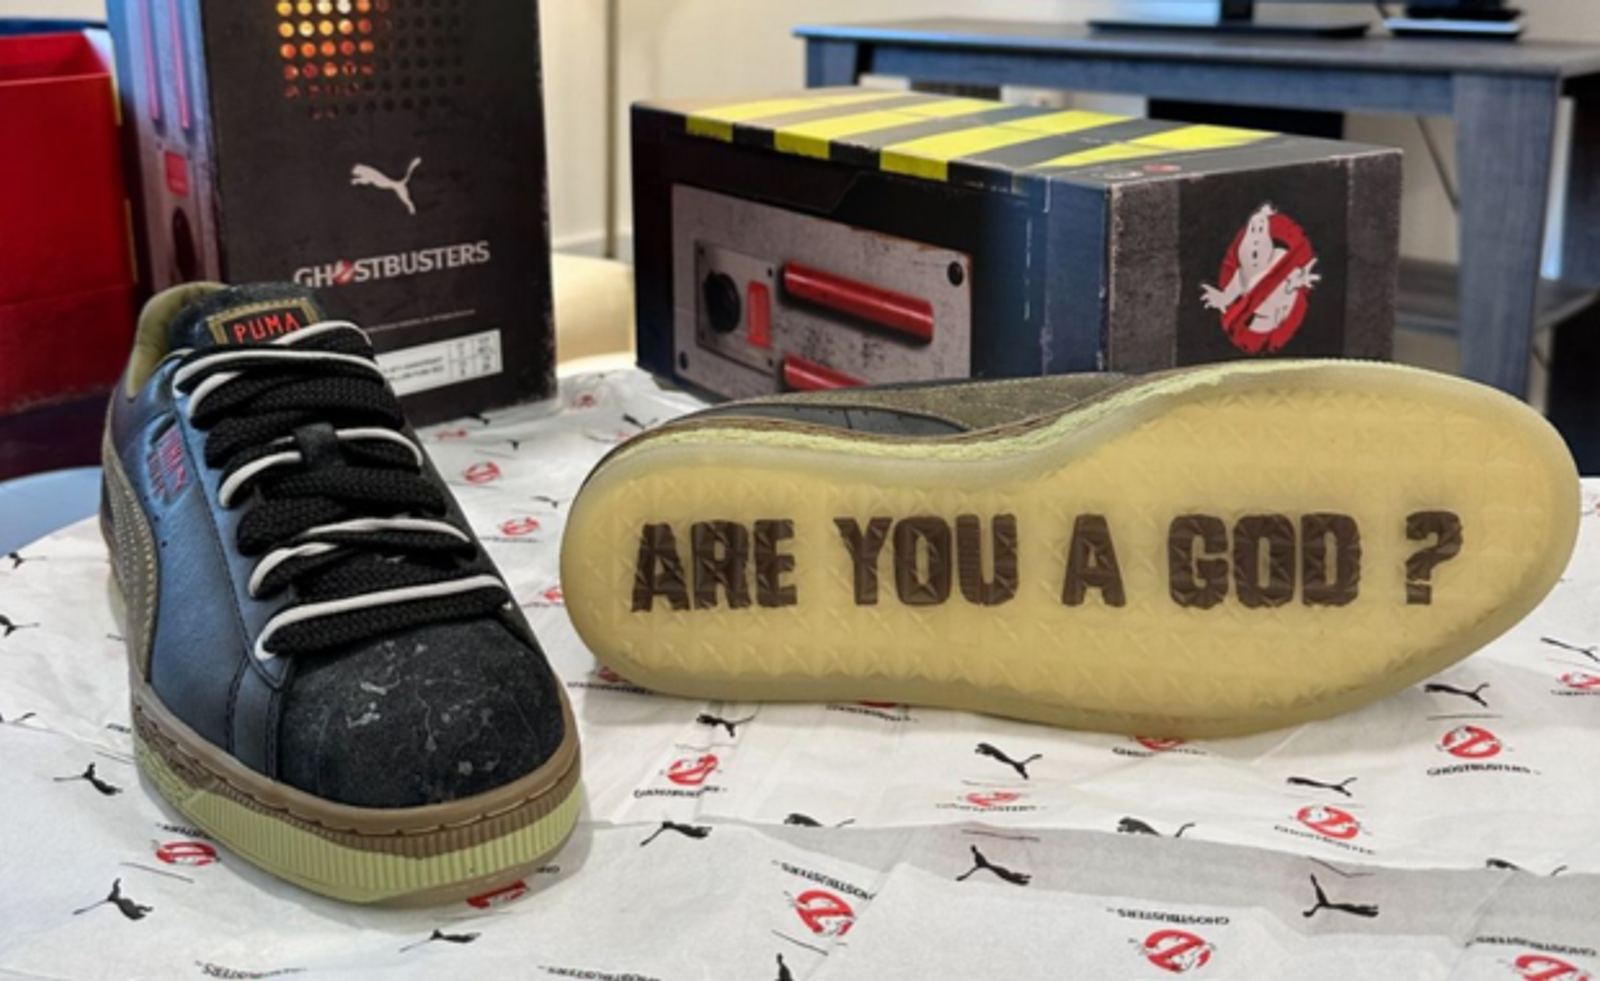 Ghostbusters x Puma Collection